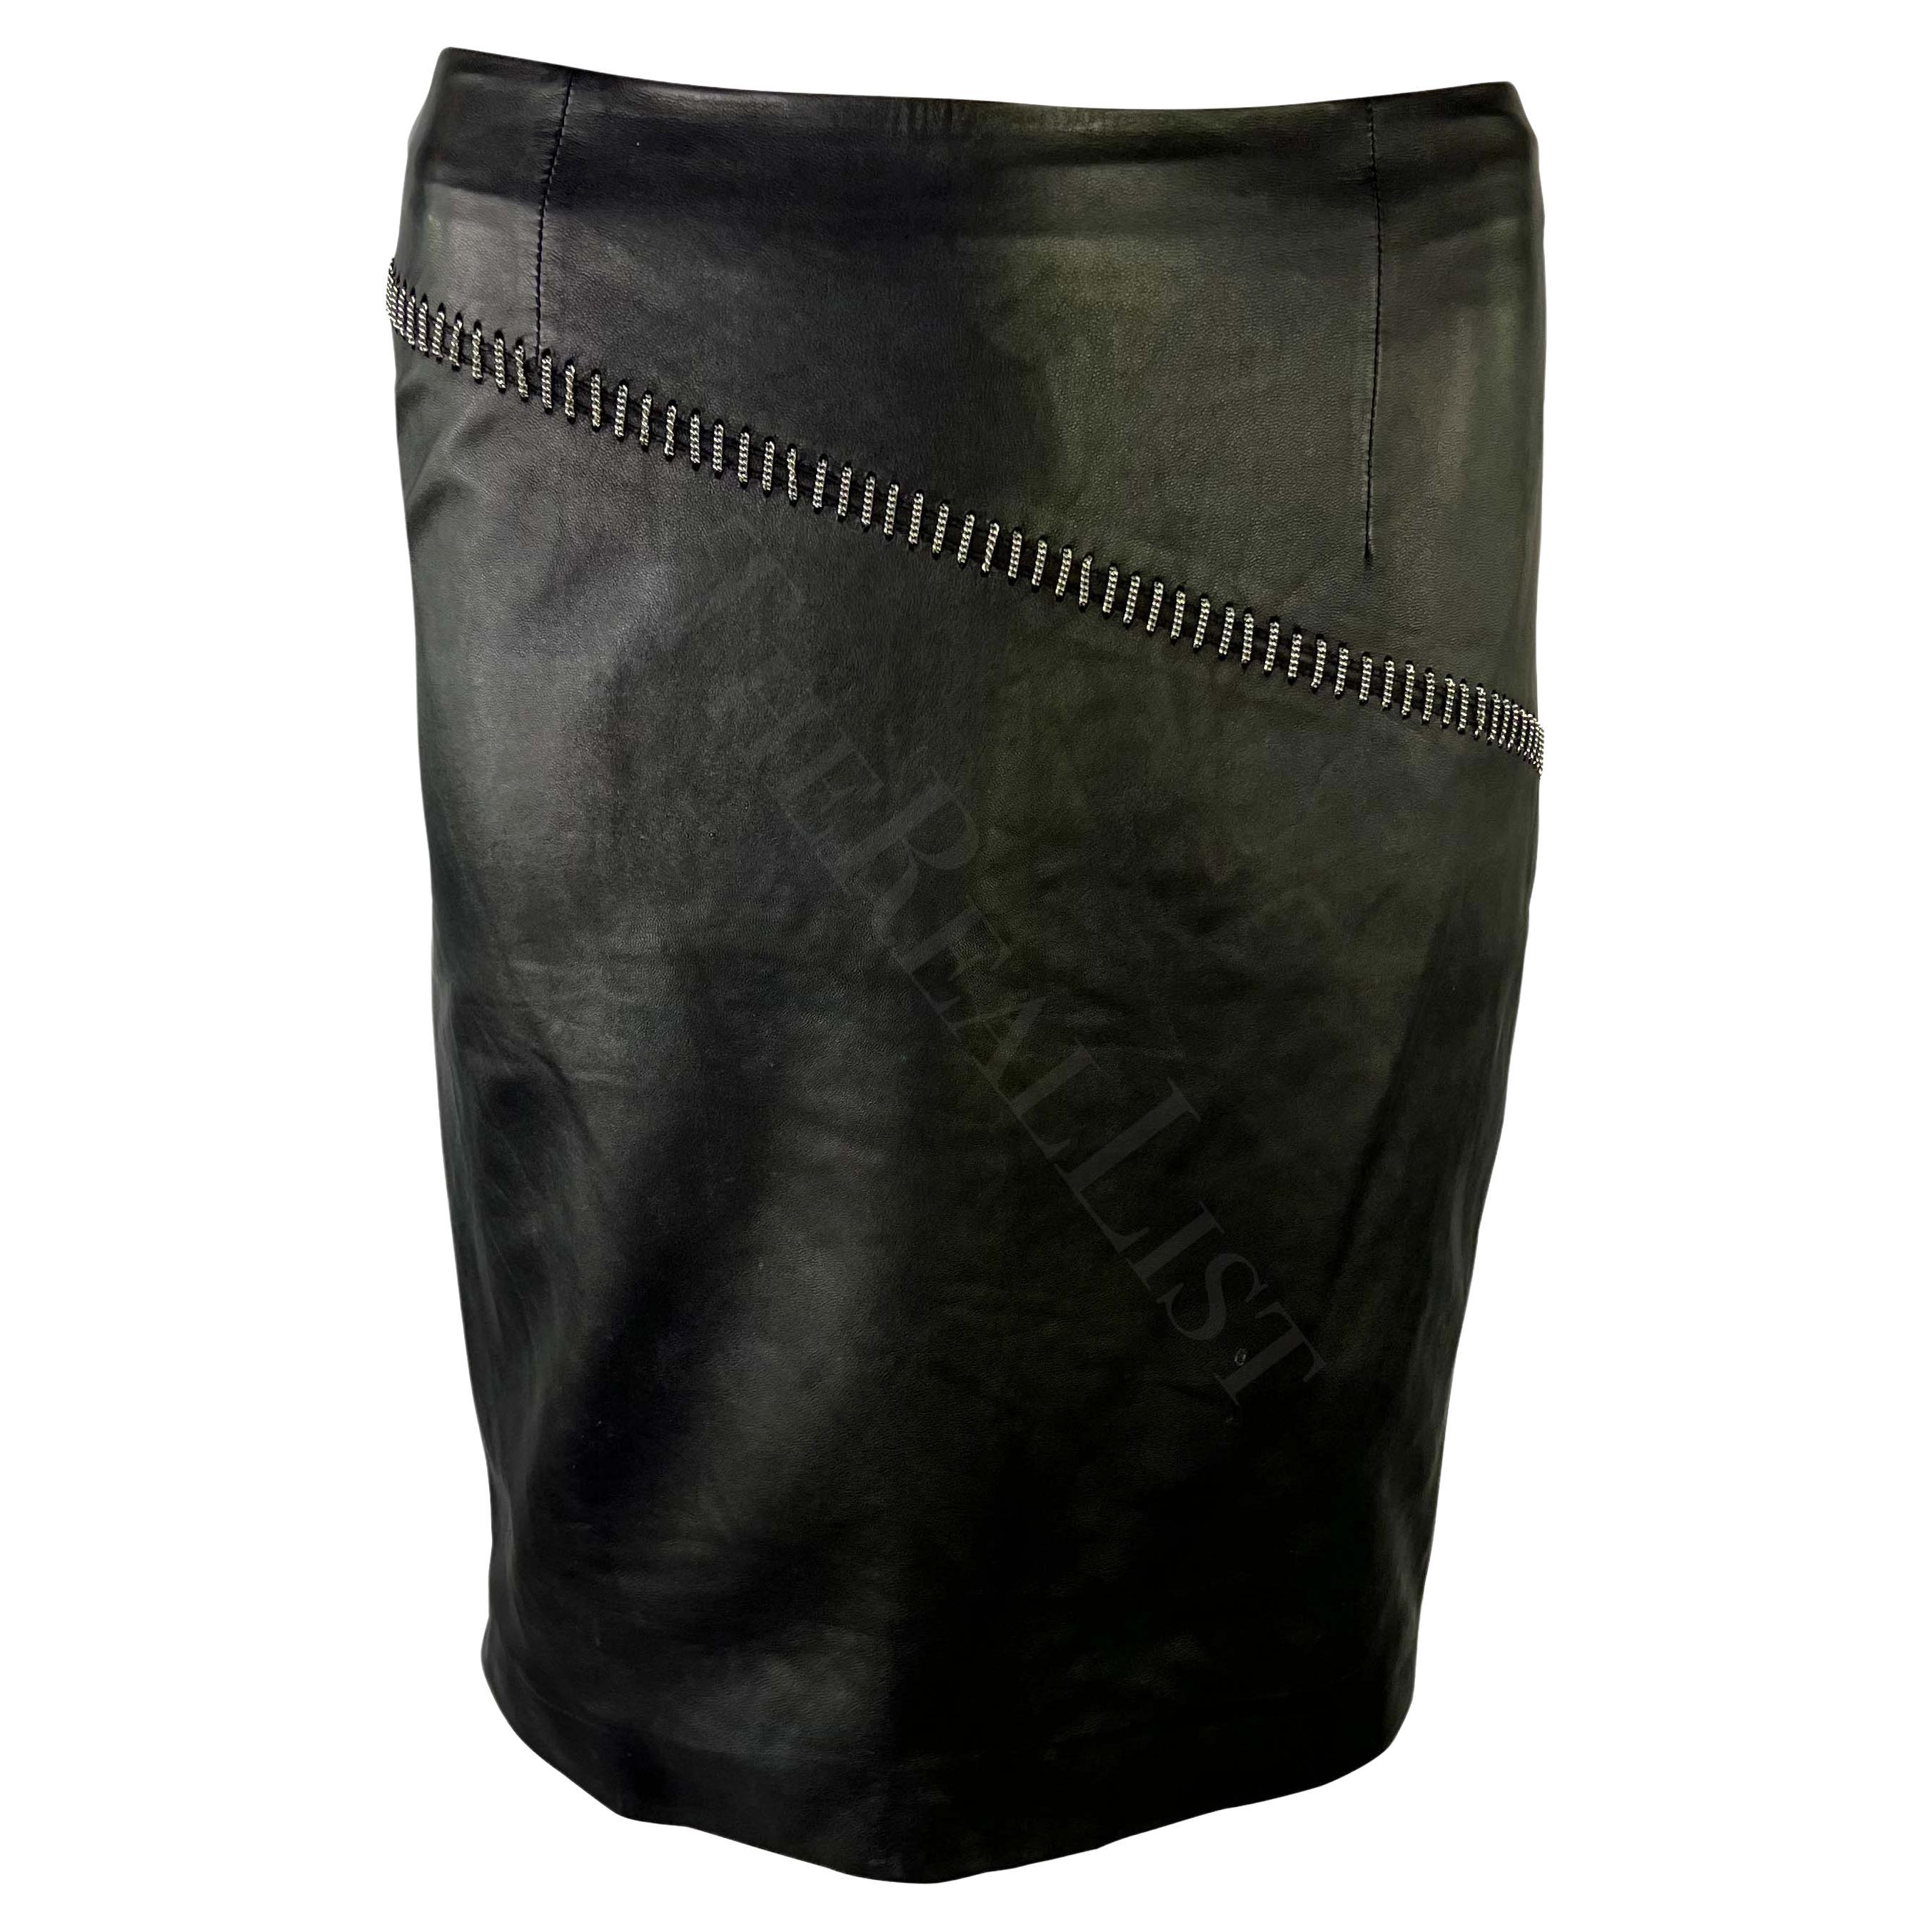 S/S 1999 Gianni Versace by Donatella Black Leather Silver Chain Mini Skirt For Sale